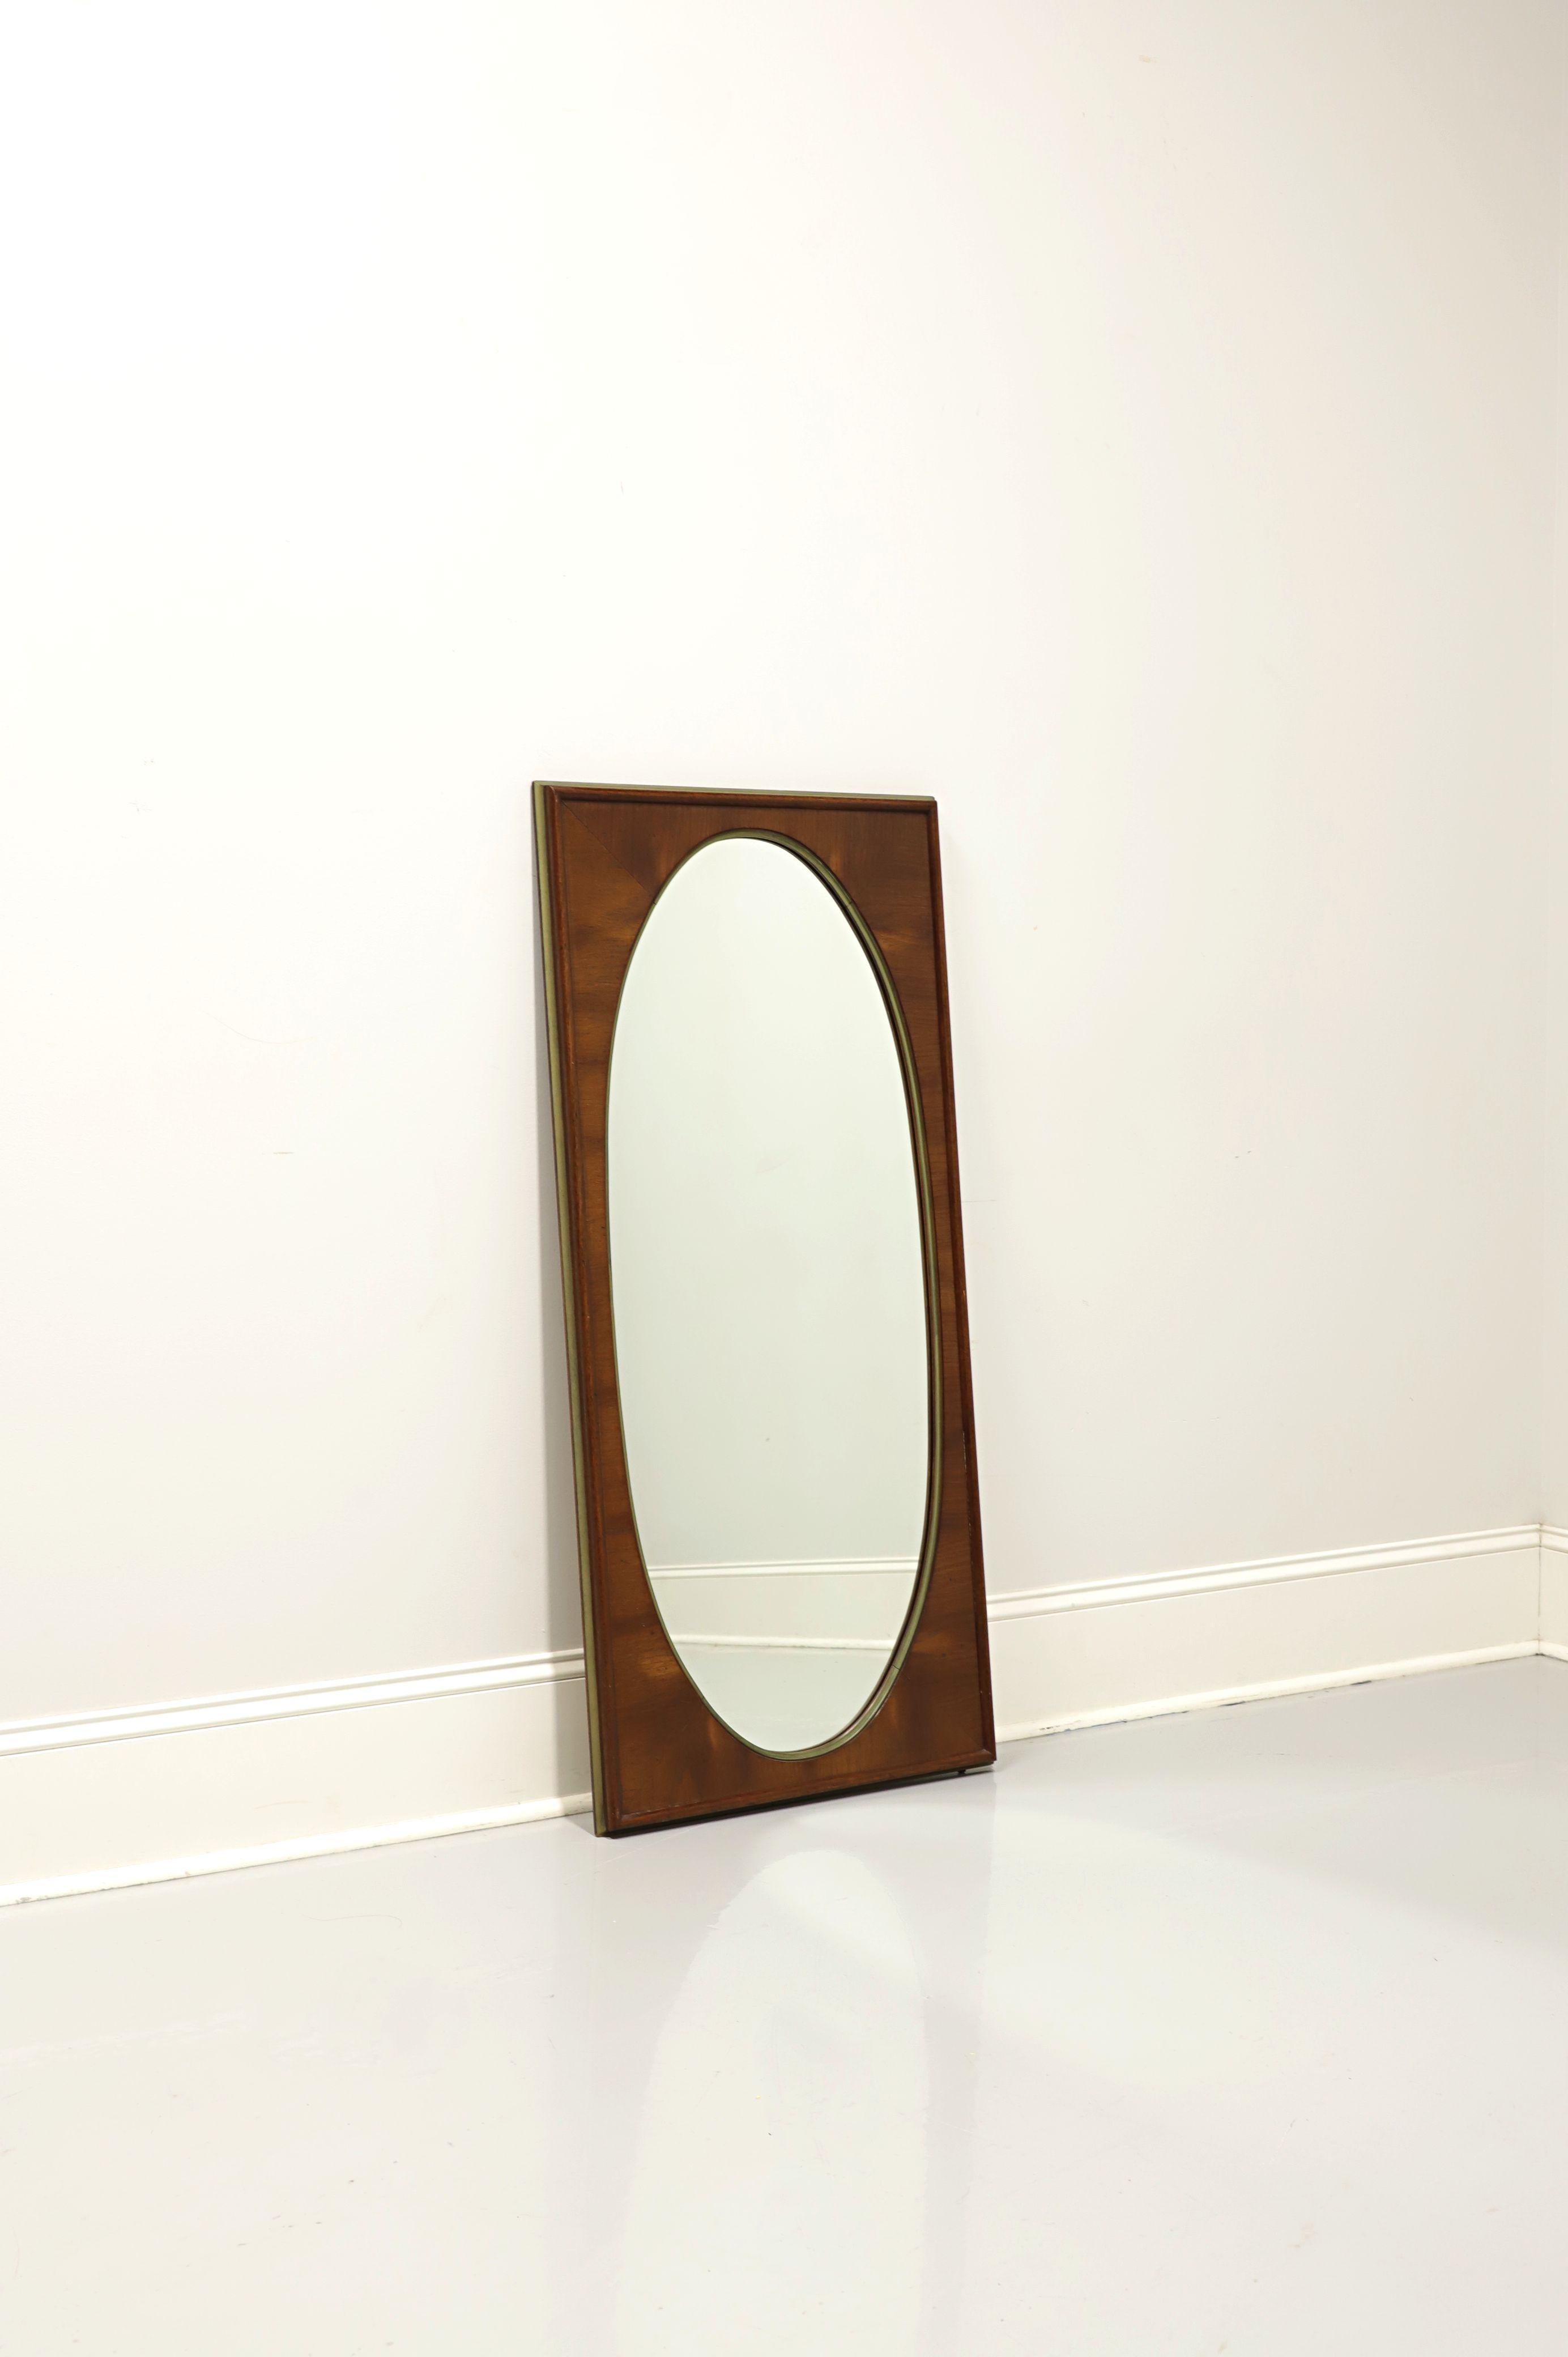 A mid century style wall mirror by White Furniture. Oval shaped mirrored glass and solid rectangular wood frame with their 